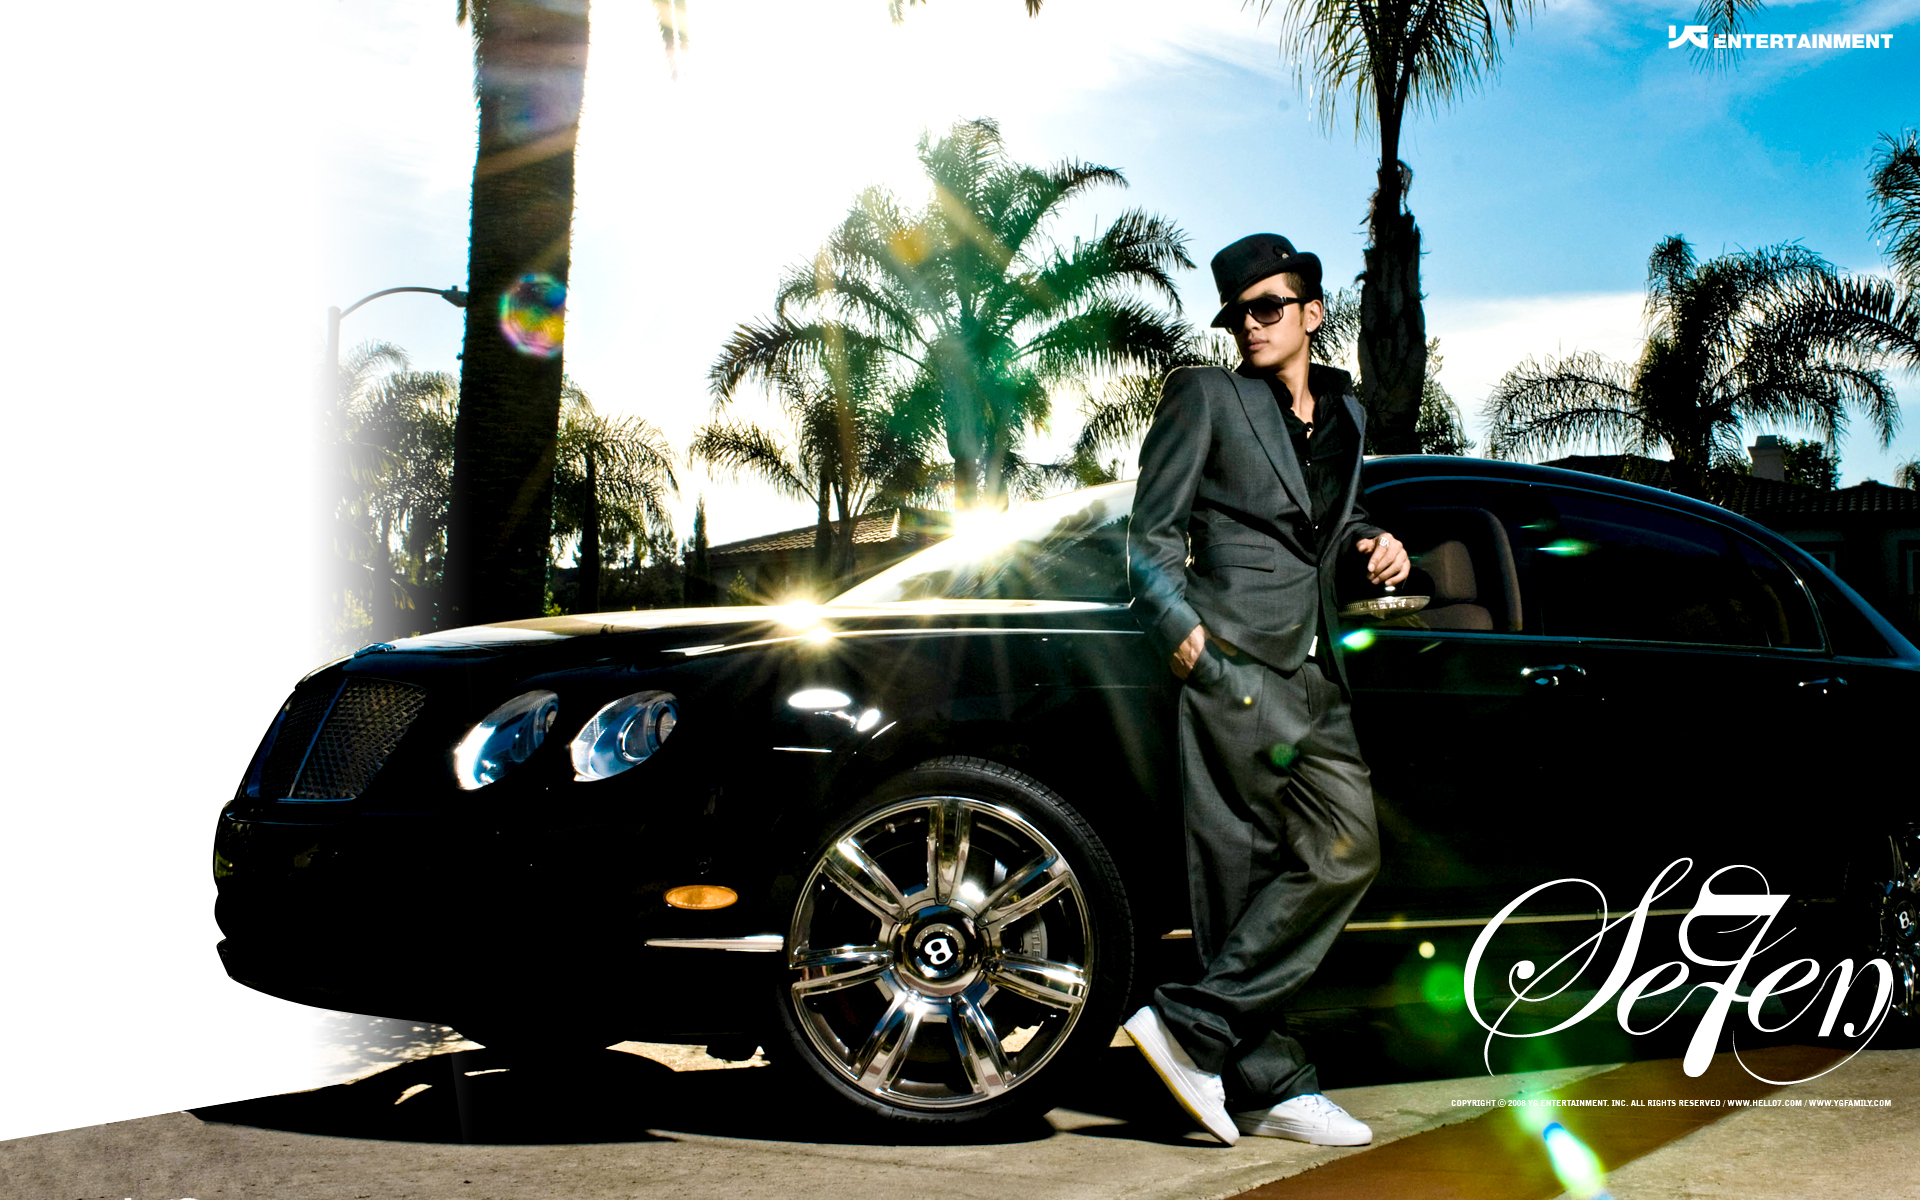 Filed under Pictures Tagged with Club Se7en, New Se7en Wallpaper, 